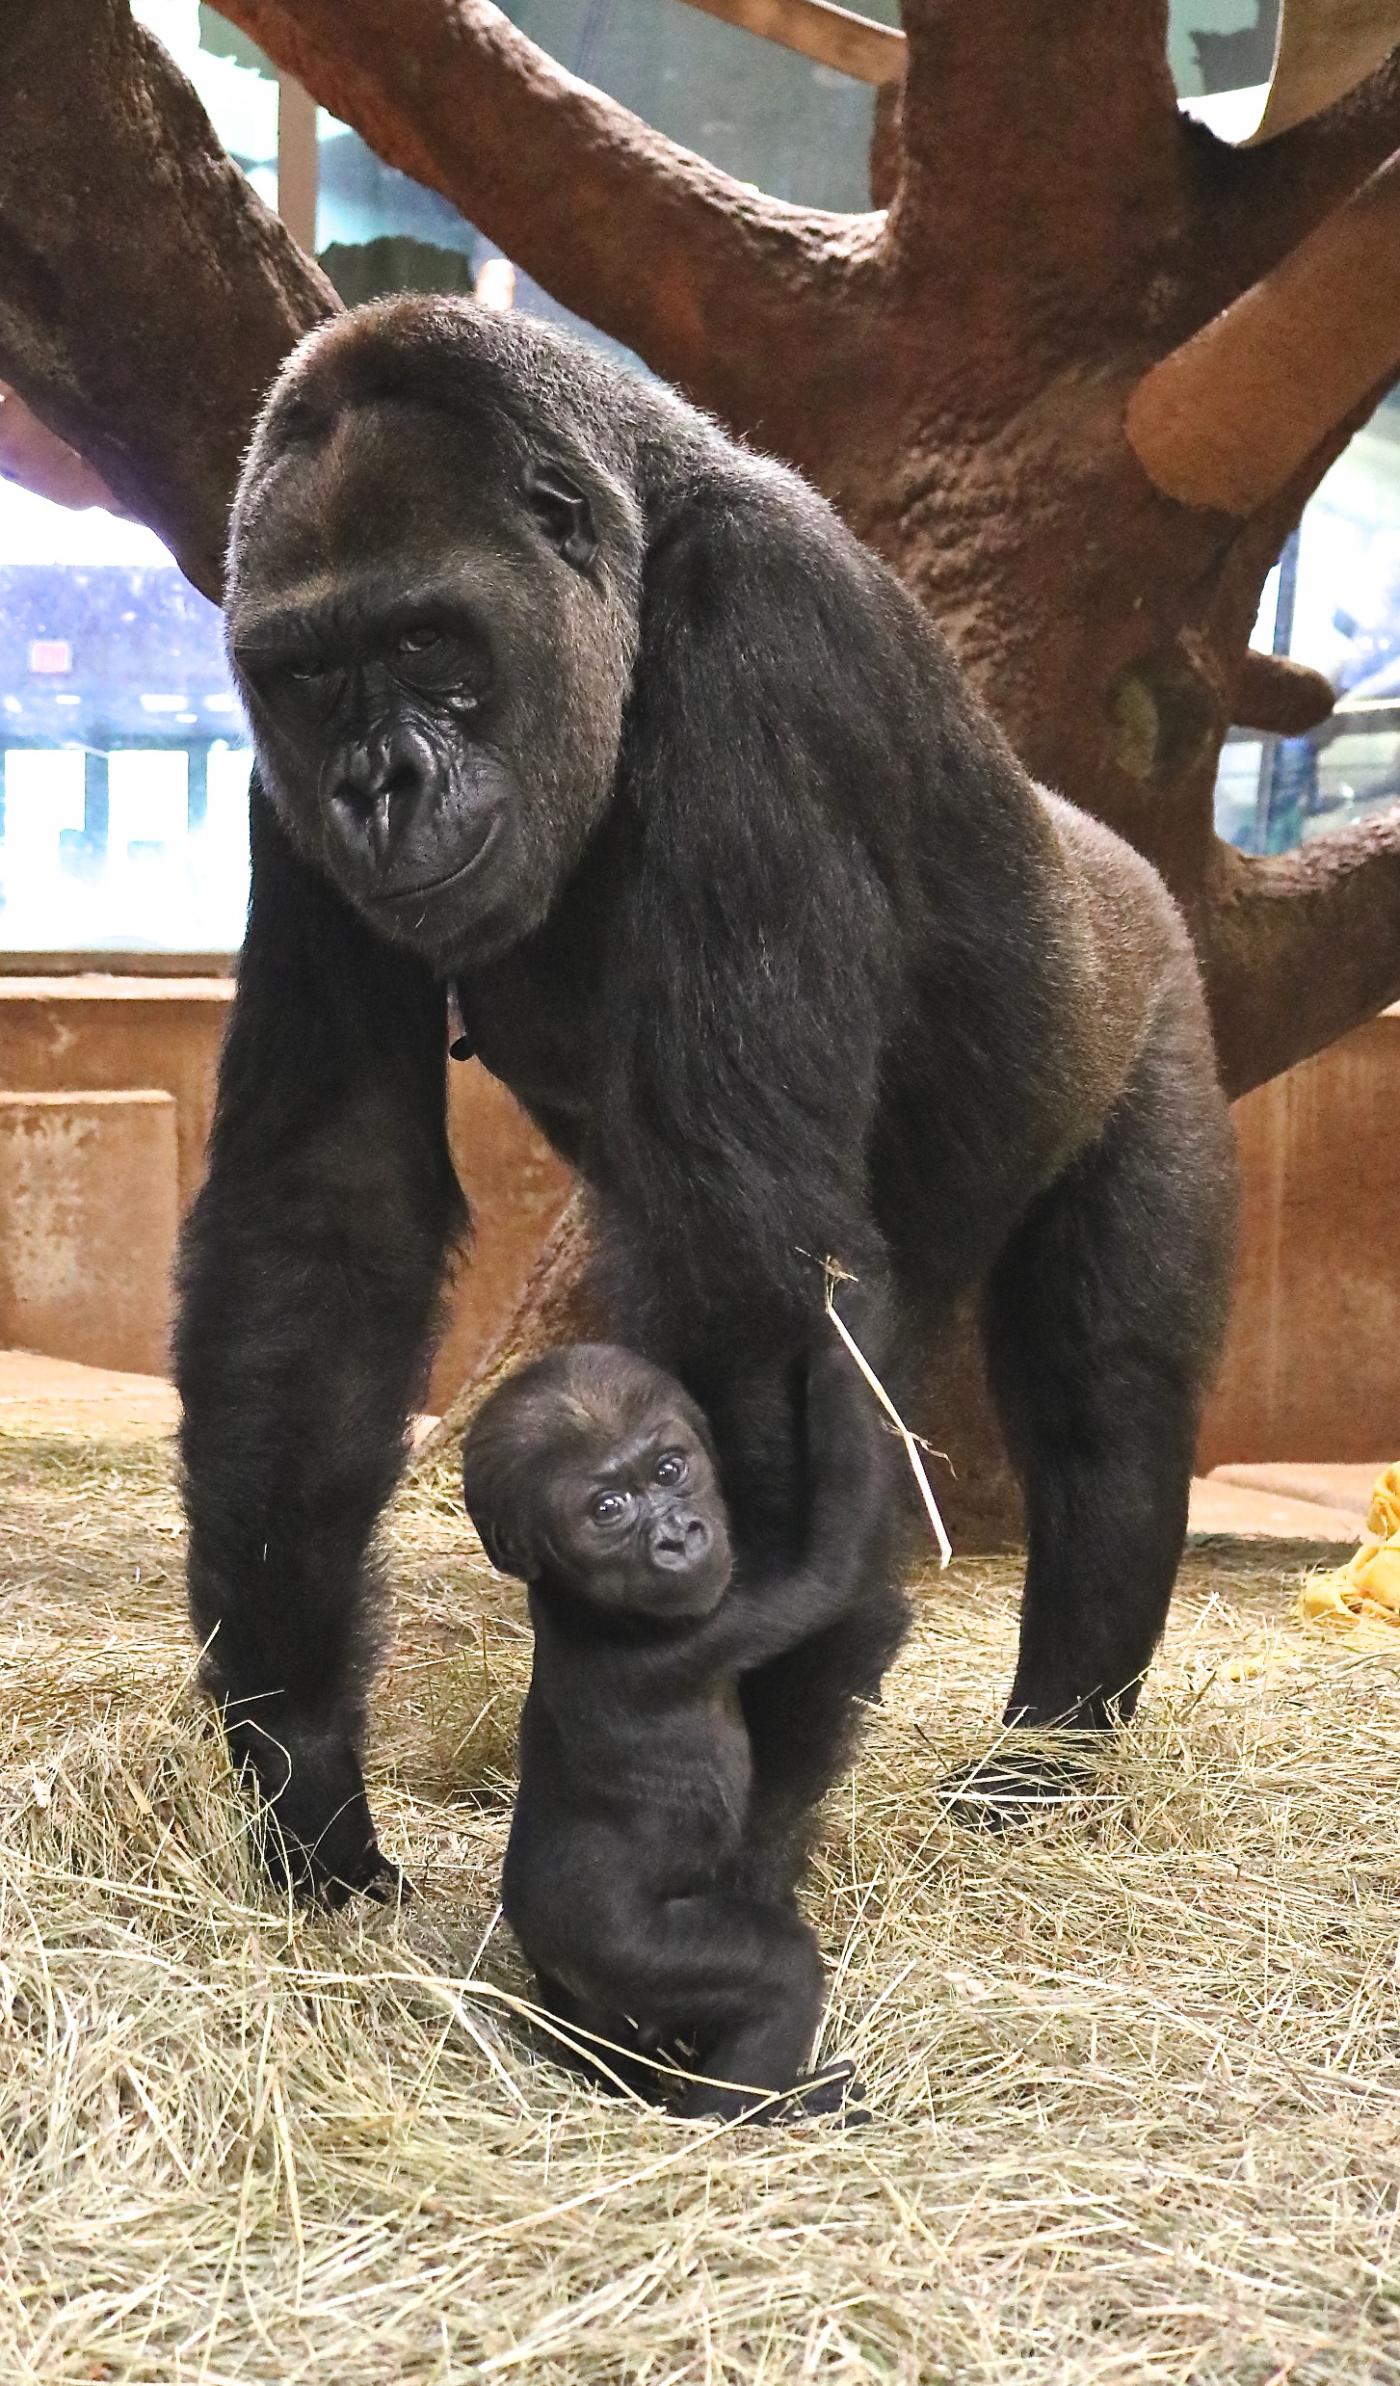 Moke, the Zoo's 10-week-old western lowland gorilla, stands up!